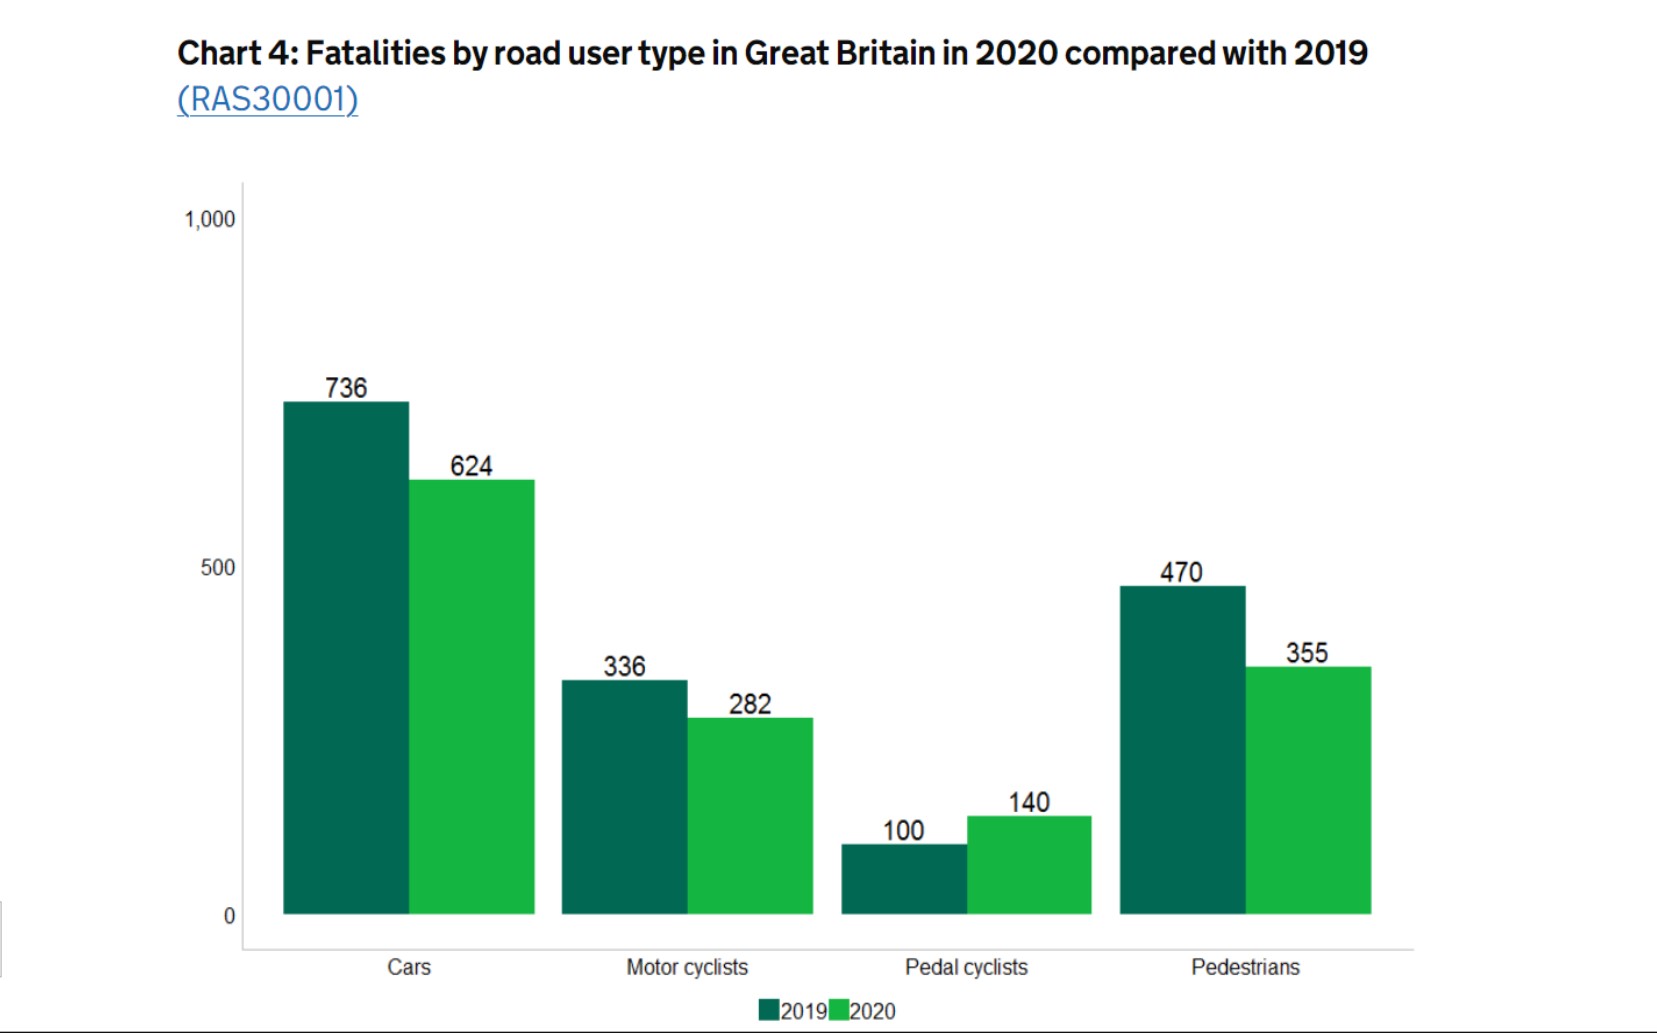 Fatalities by road user type in the UK